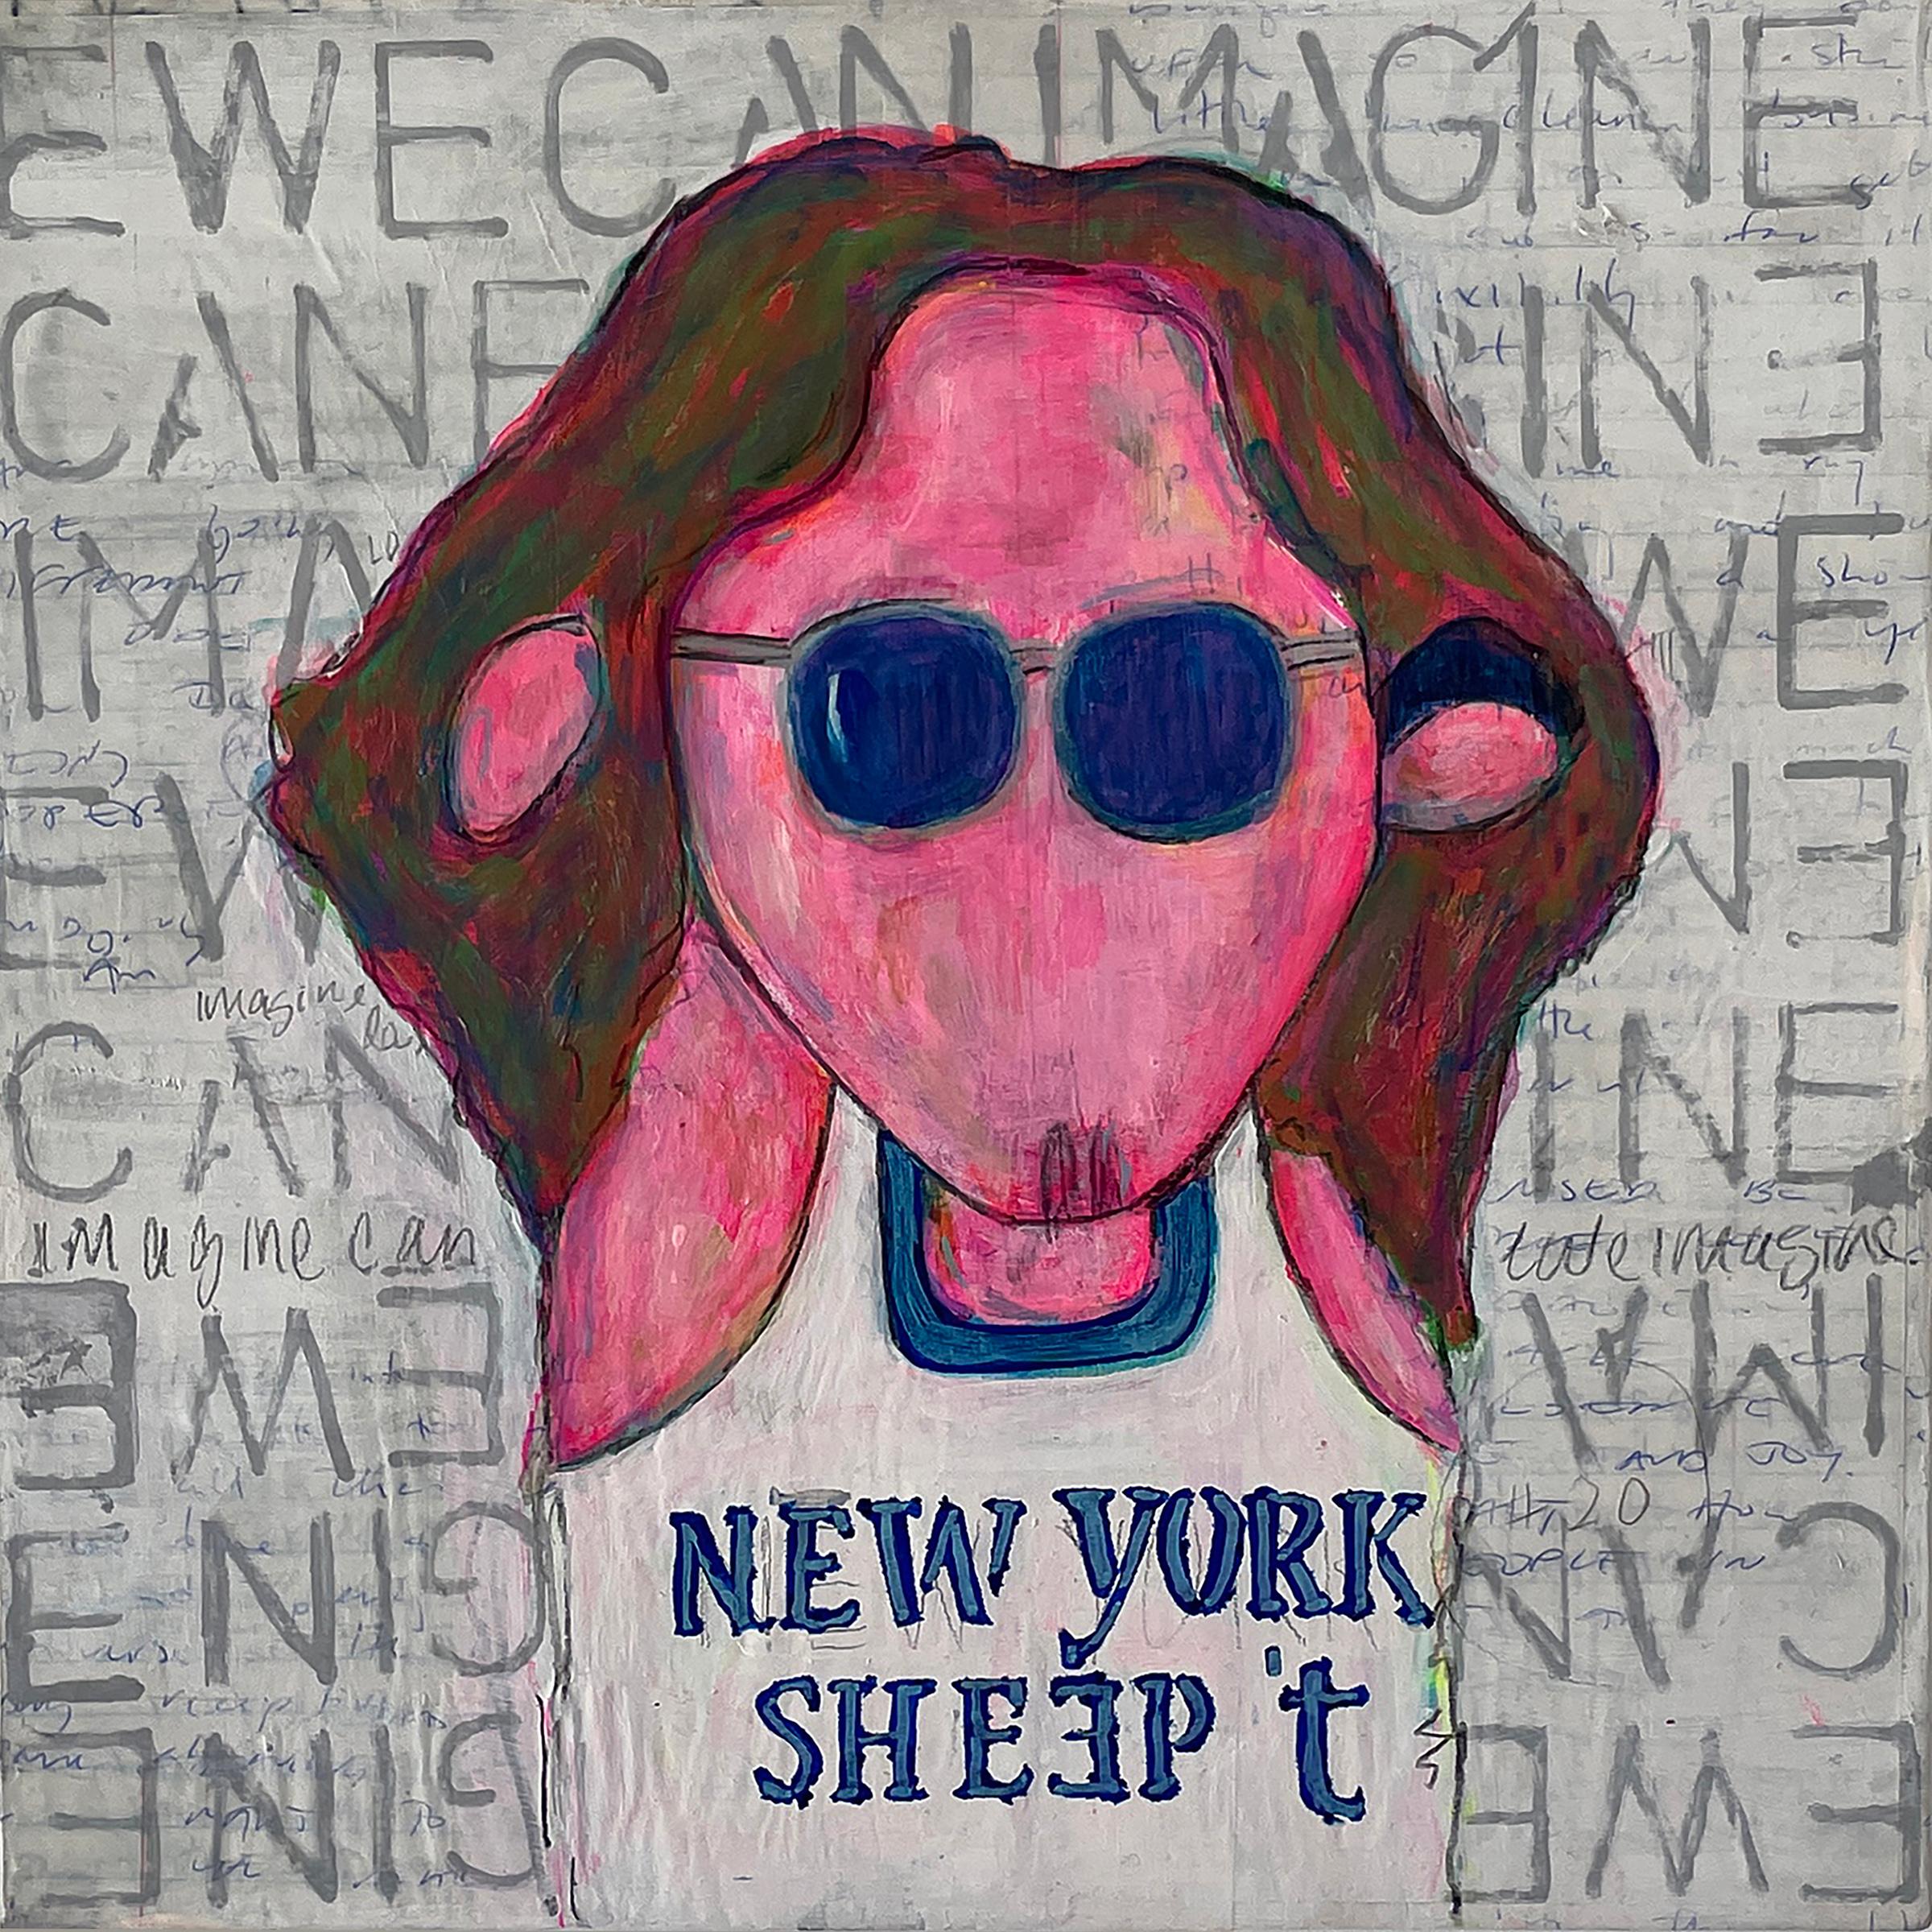 Can Ewe Imagine - mixed media on wood - Painting by Little Ricky